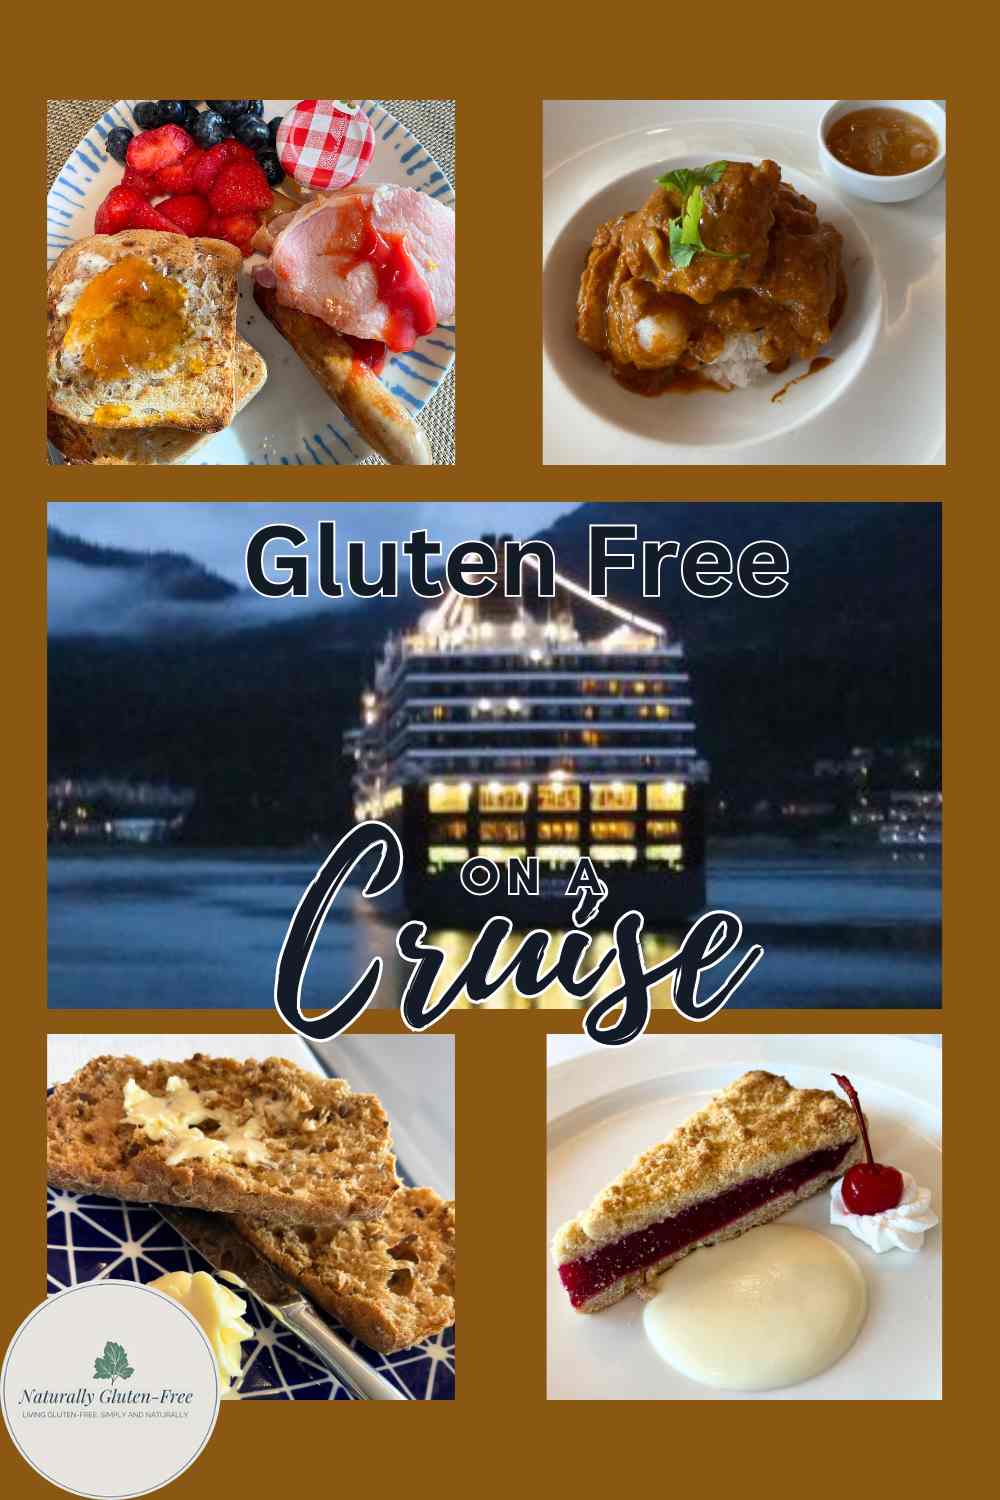 Gluten Free on a Cruise - Pinterest Image - cruise ship at night with inserts of gluten free toast and fruit, gluten free fish curry, gluten free bread and butter, gluten free dessert